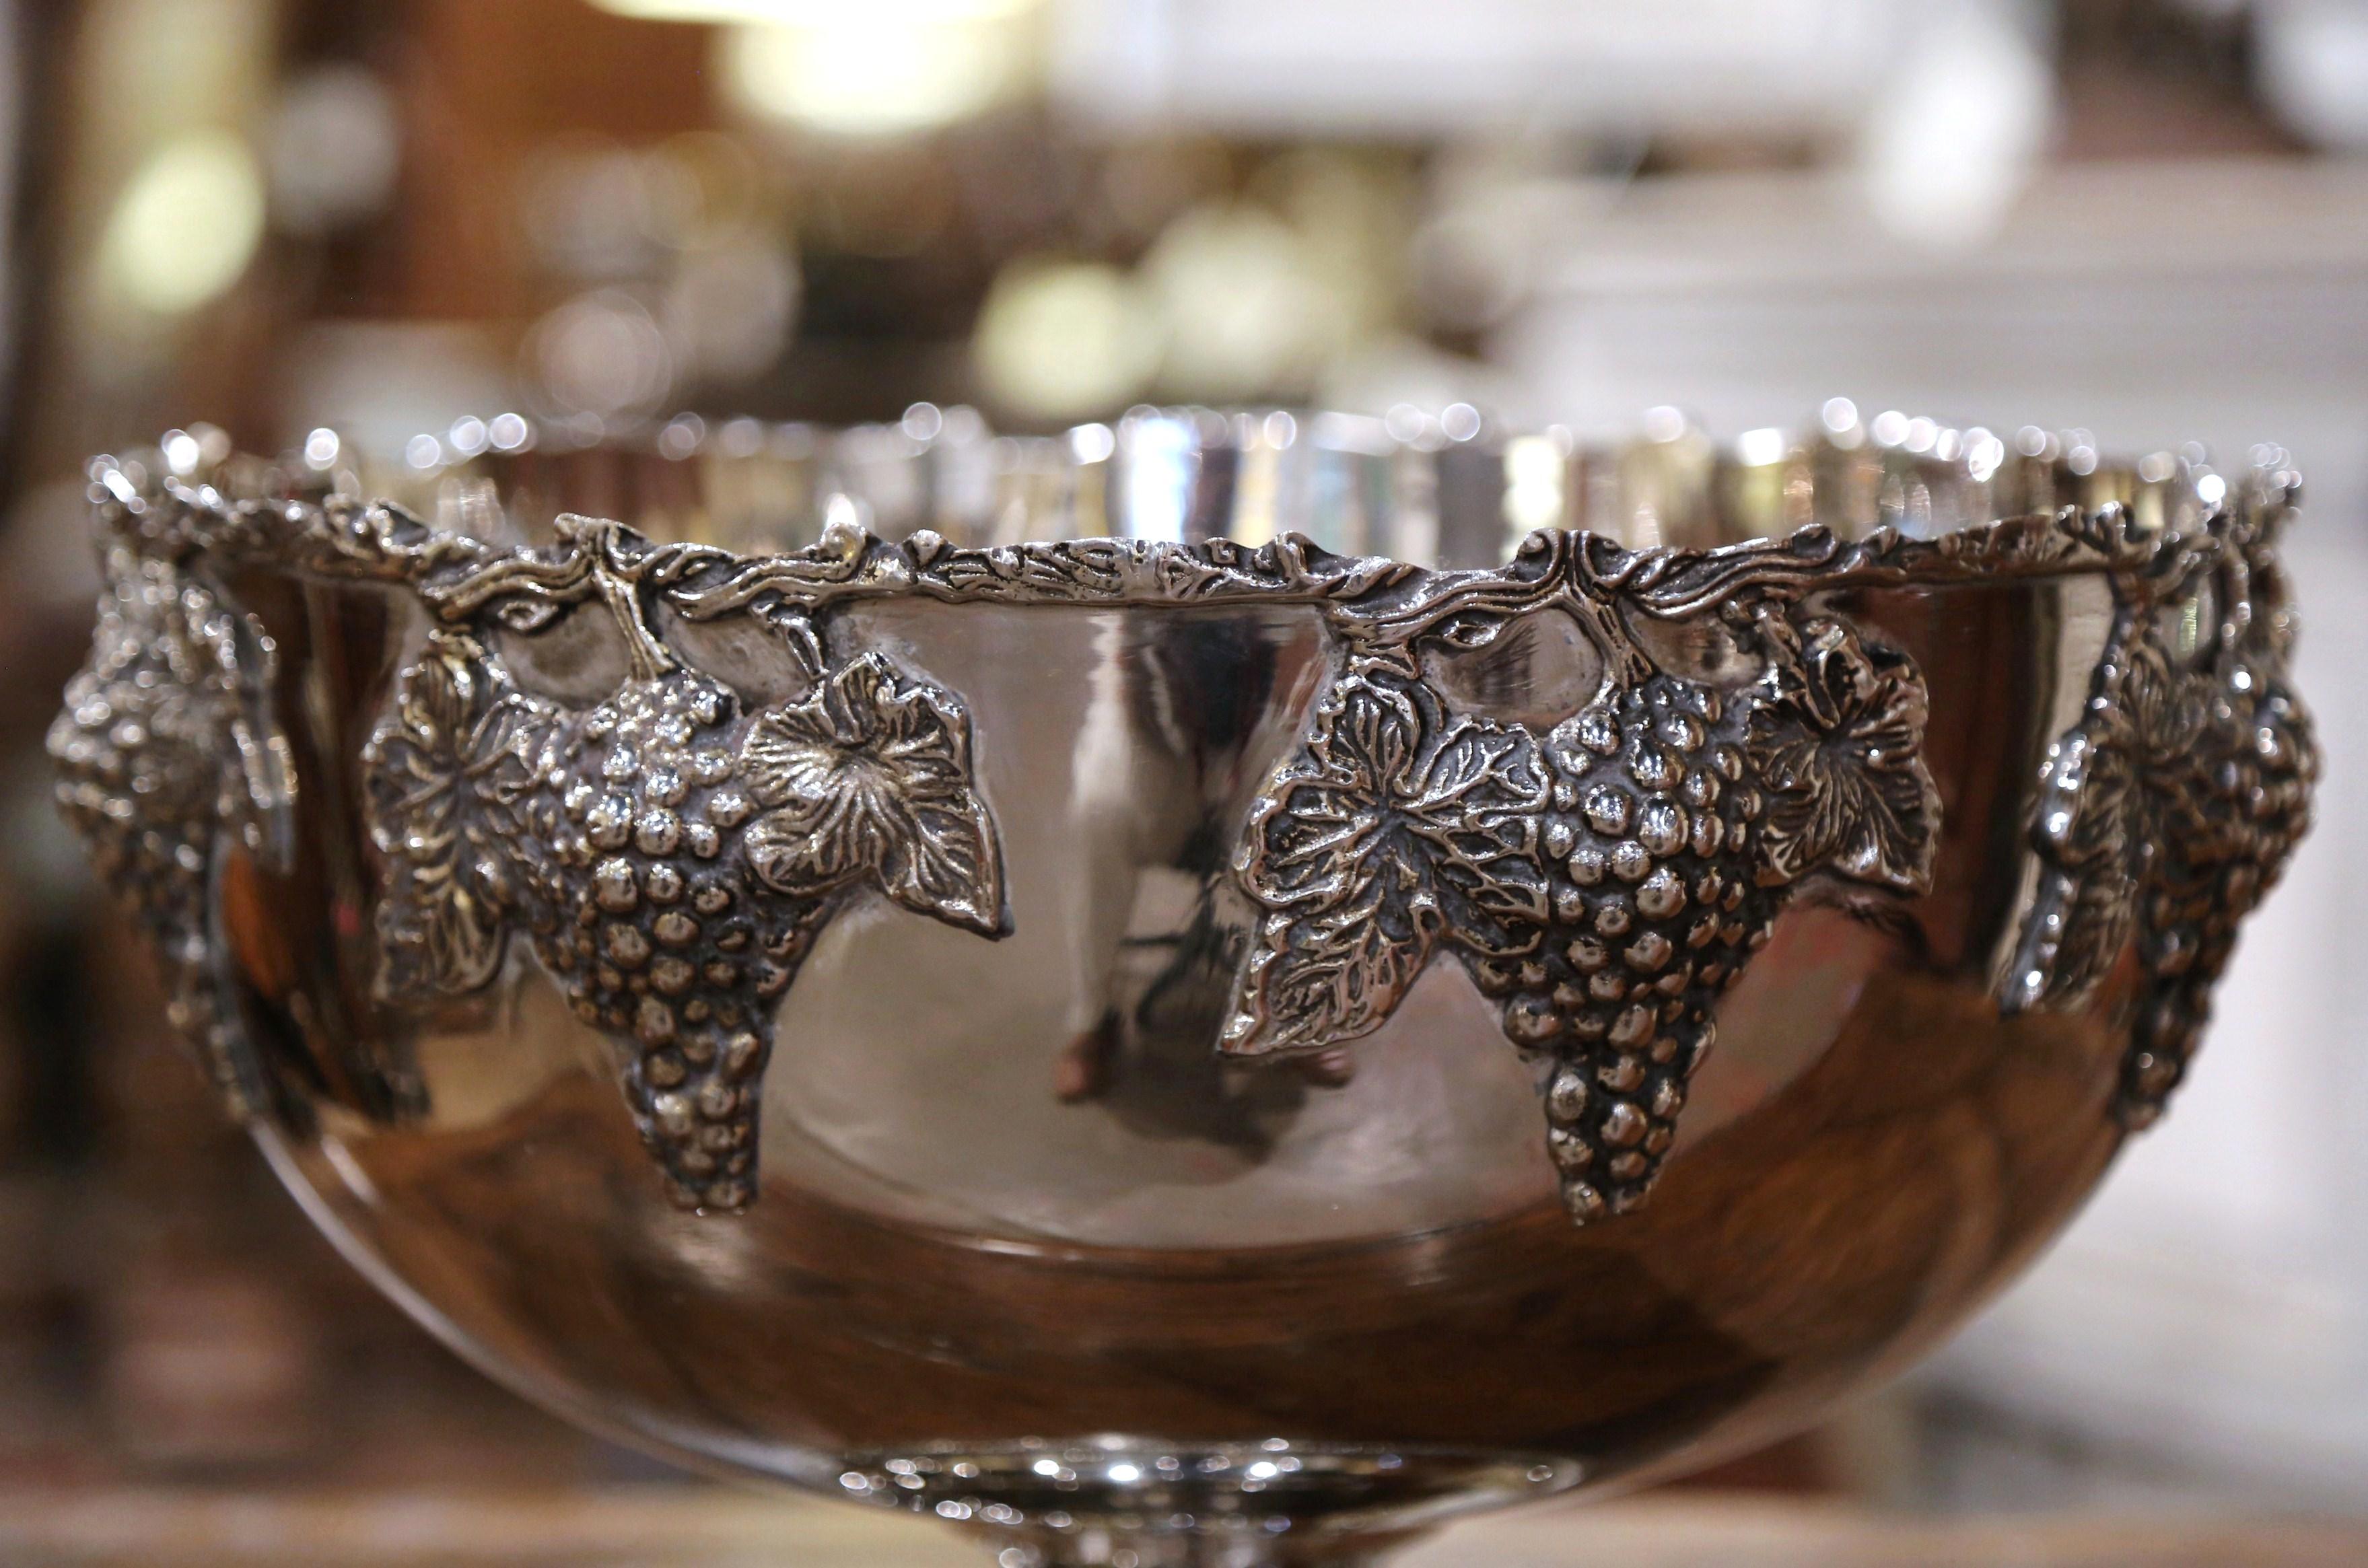 Hand-Crafted Mid-20th Century French Silver Plated Wine Cooler Bowl with Grape and Vine Decor